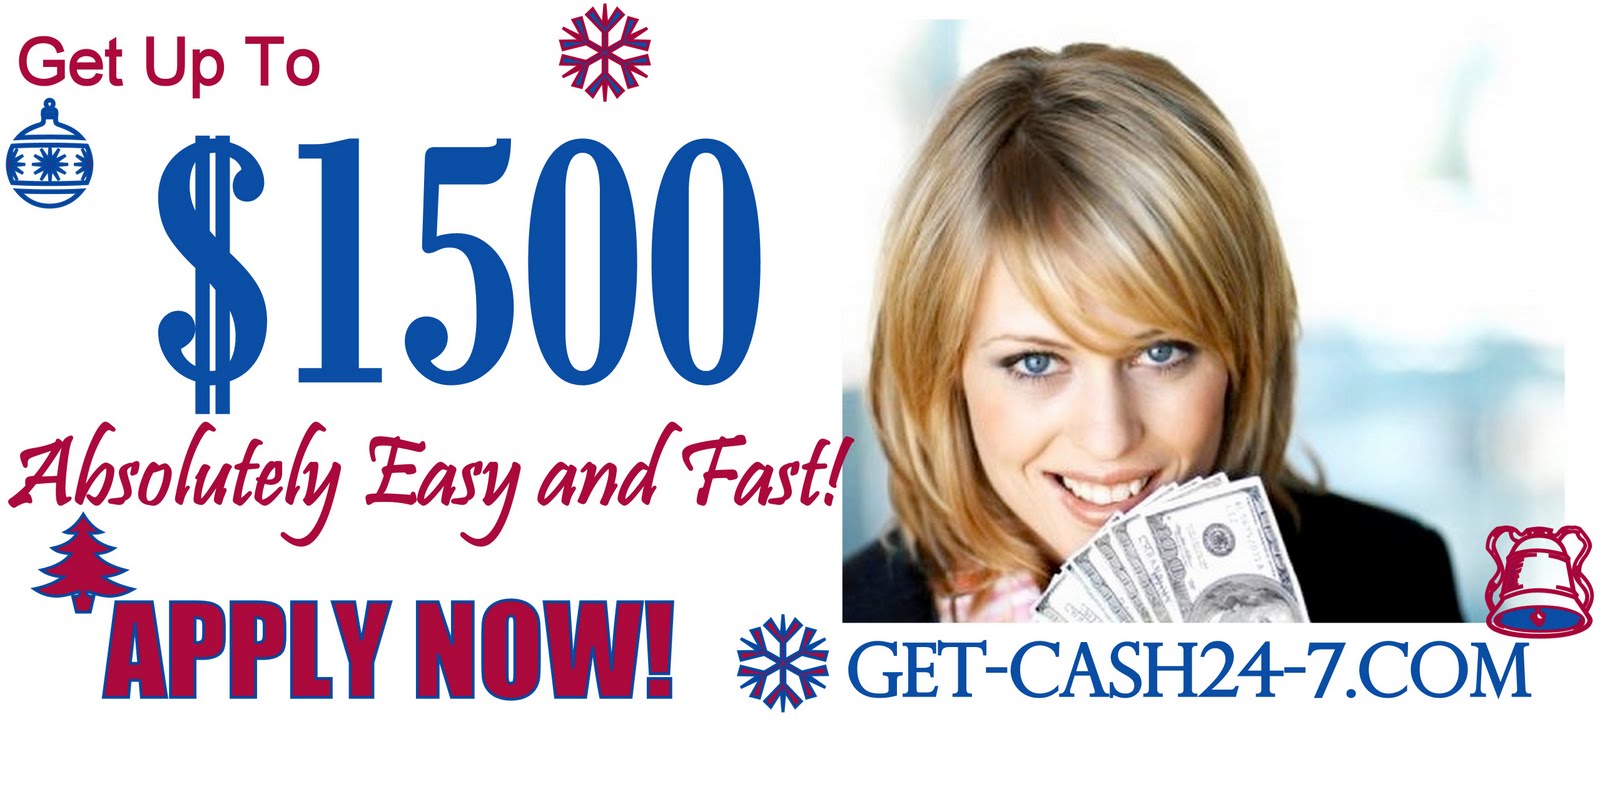 Online payday loan is a